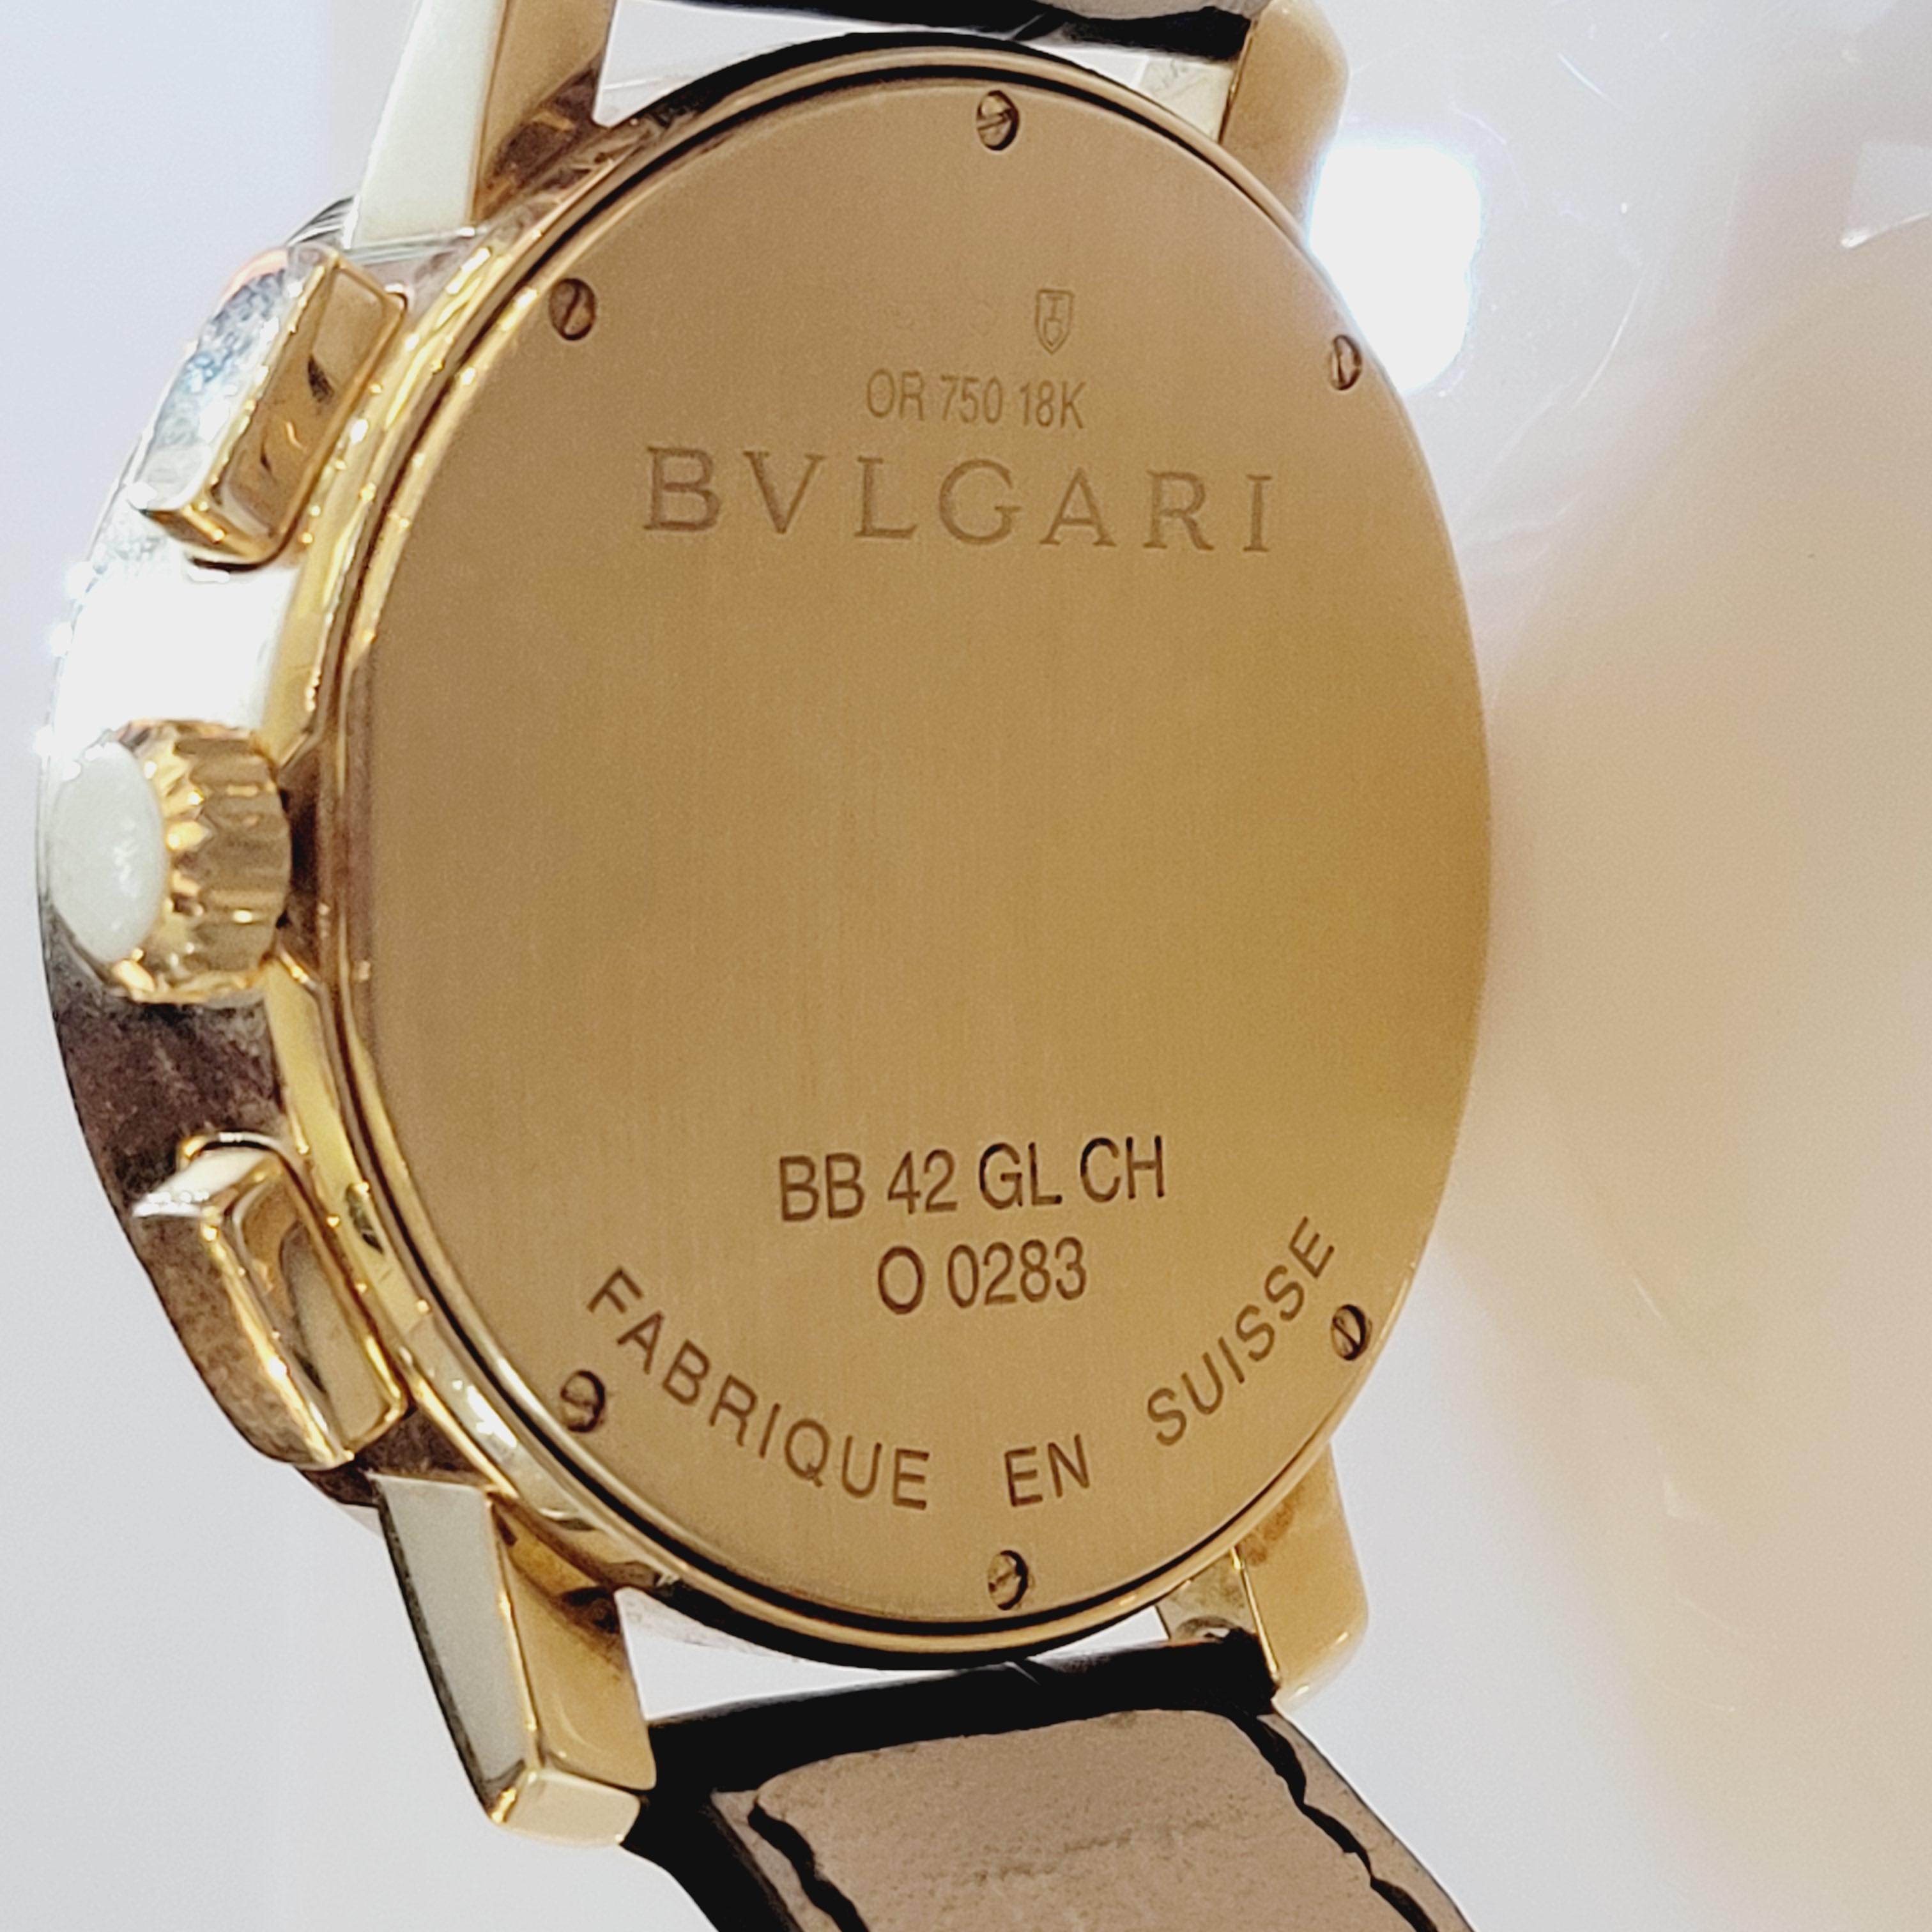 Listing code	G6LM20
Brand	Bulgari
Model	Bulgari
Reference number	BULGARI CHRONOGRAPH BB 42 GLCH AUTOMATIC 18K GOLD 42MM
Movement	Automatic
Case material	Yellow gold
Bracelet material	Leather
Year of production	2015
Condition	Very good (Worn with